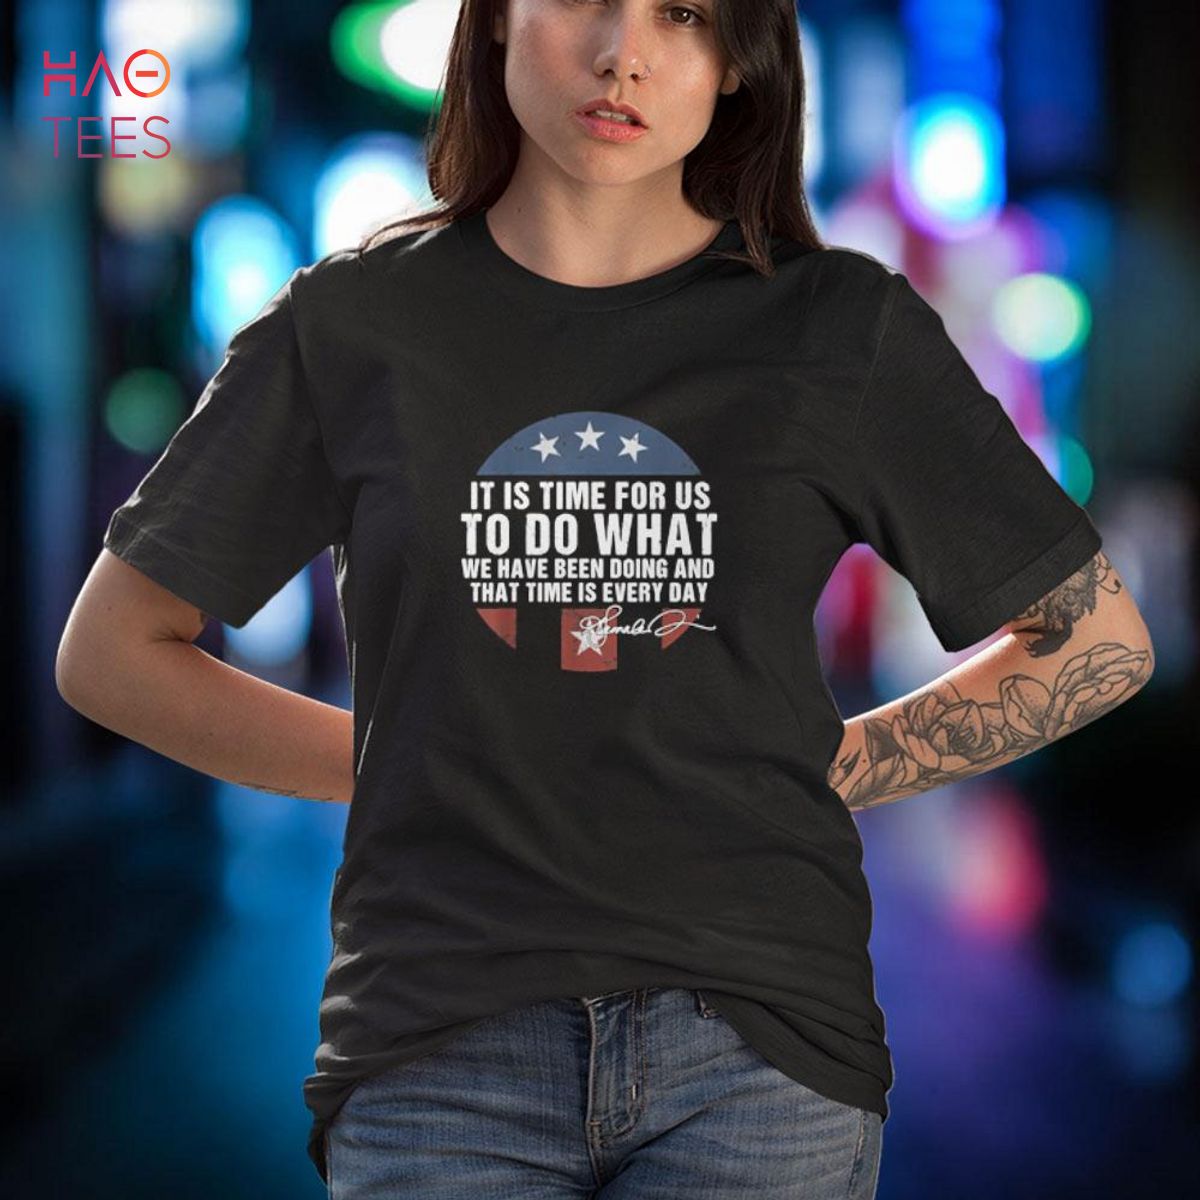 It's Time For Us To Do What We Have Been Doing 4 Shirt